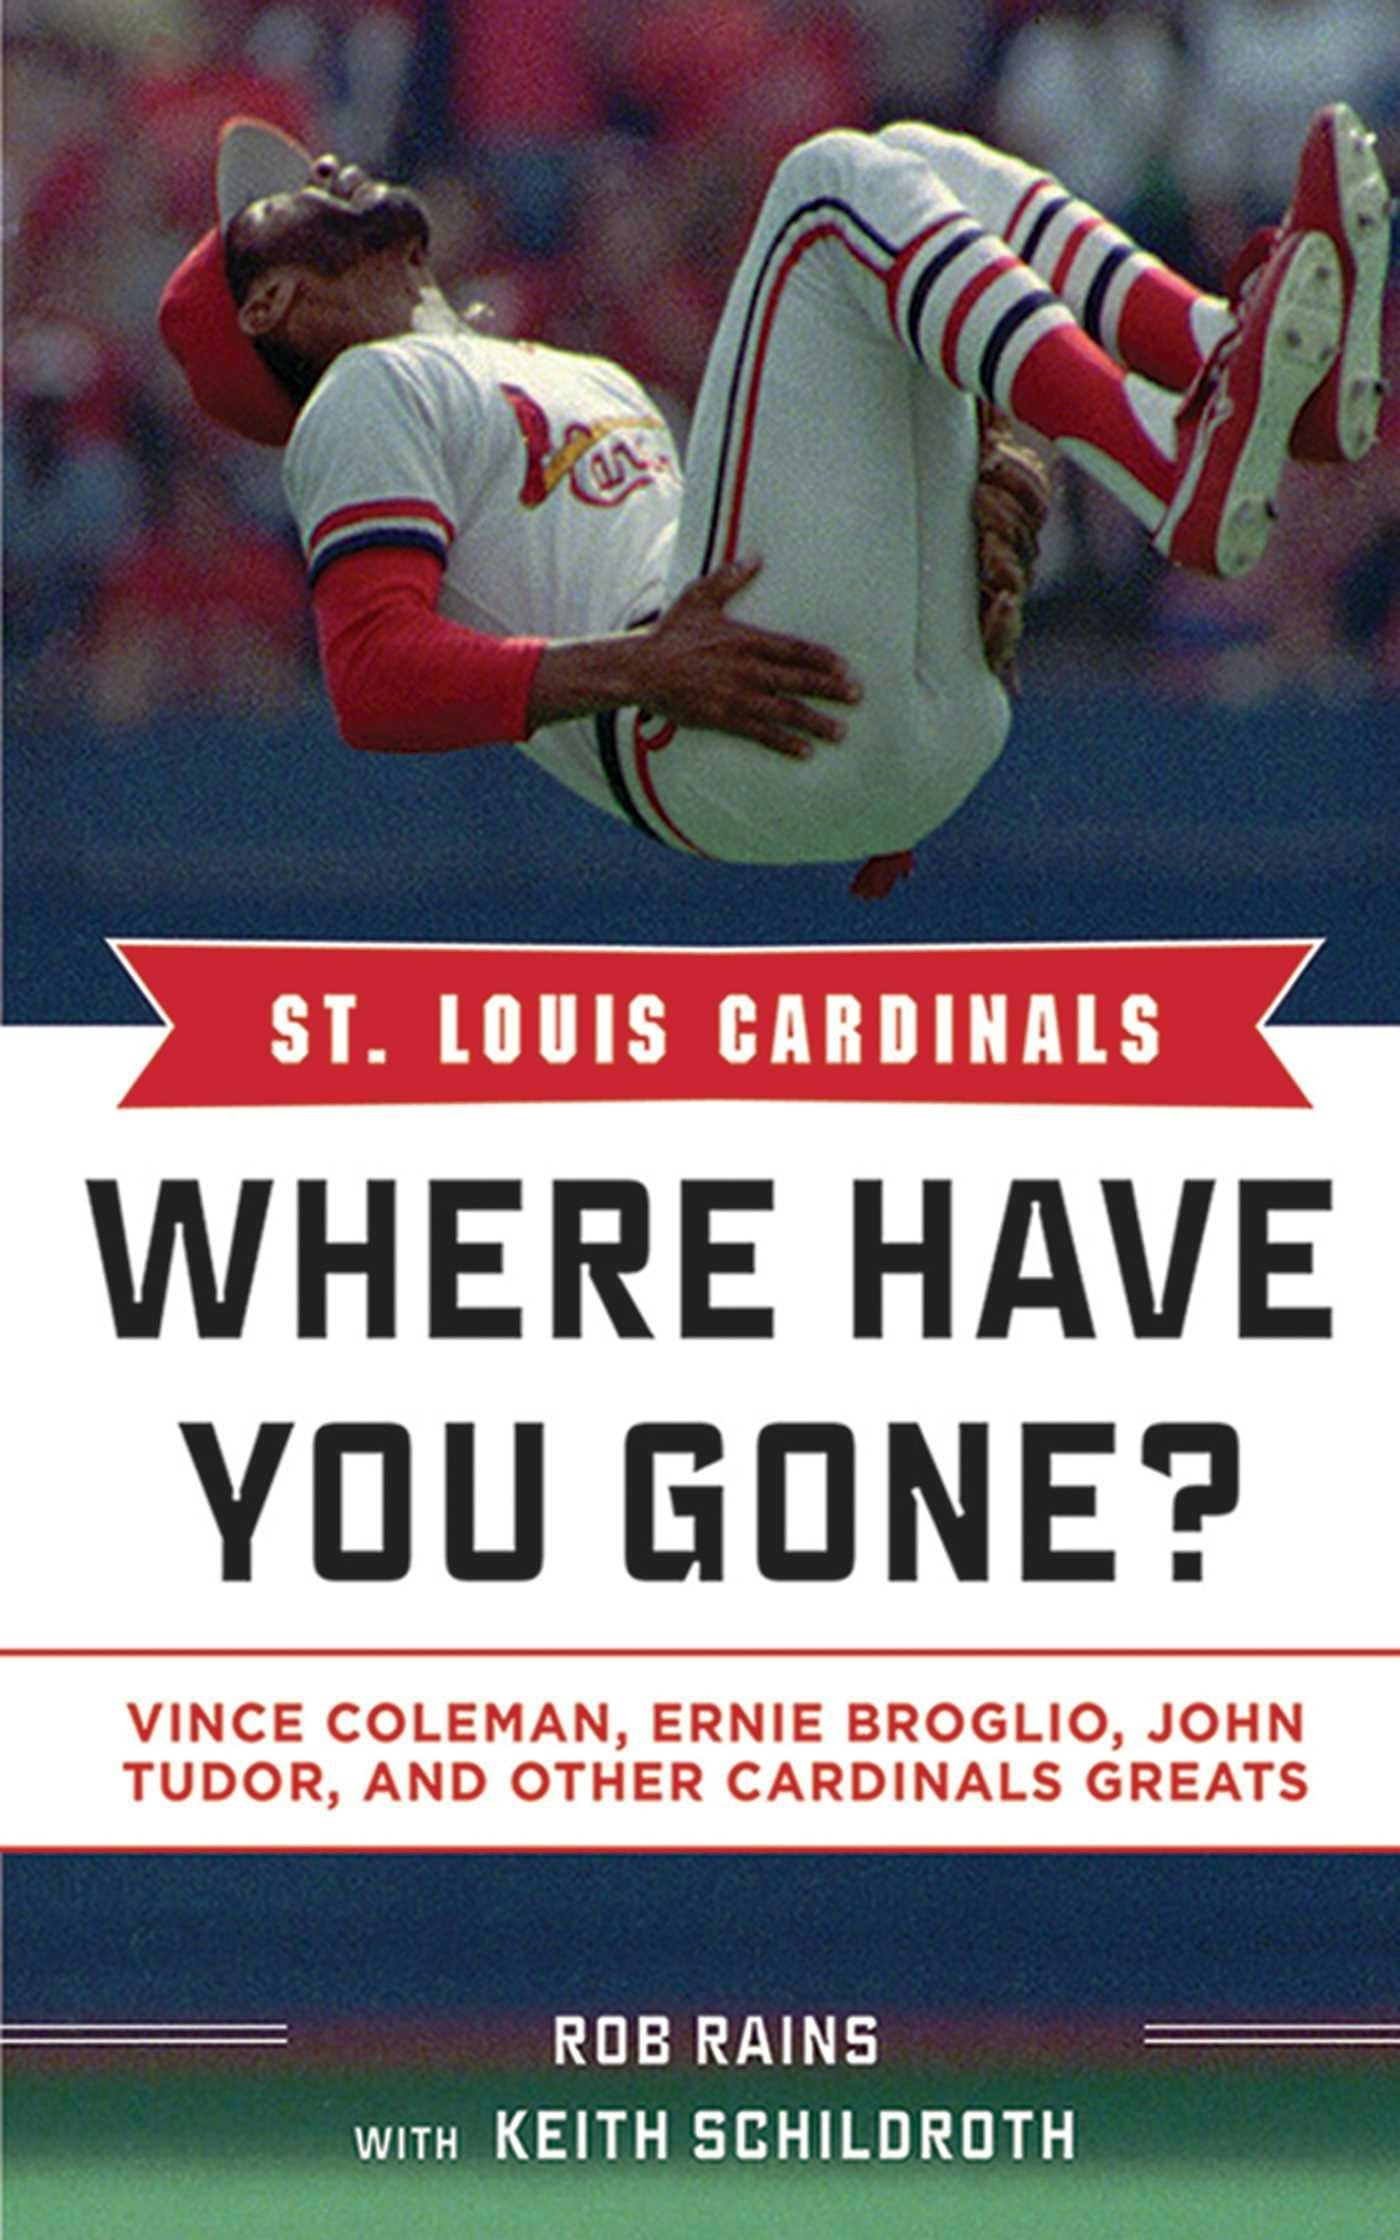 St. Louis Cardinals: Where Have You Gone? Vince Coleman, Ernie Broglio, John Tudor, and Other Cardinals Greats - undefined